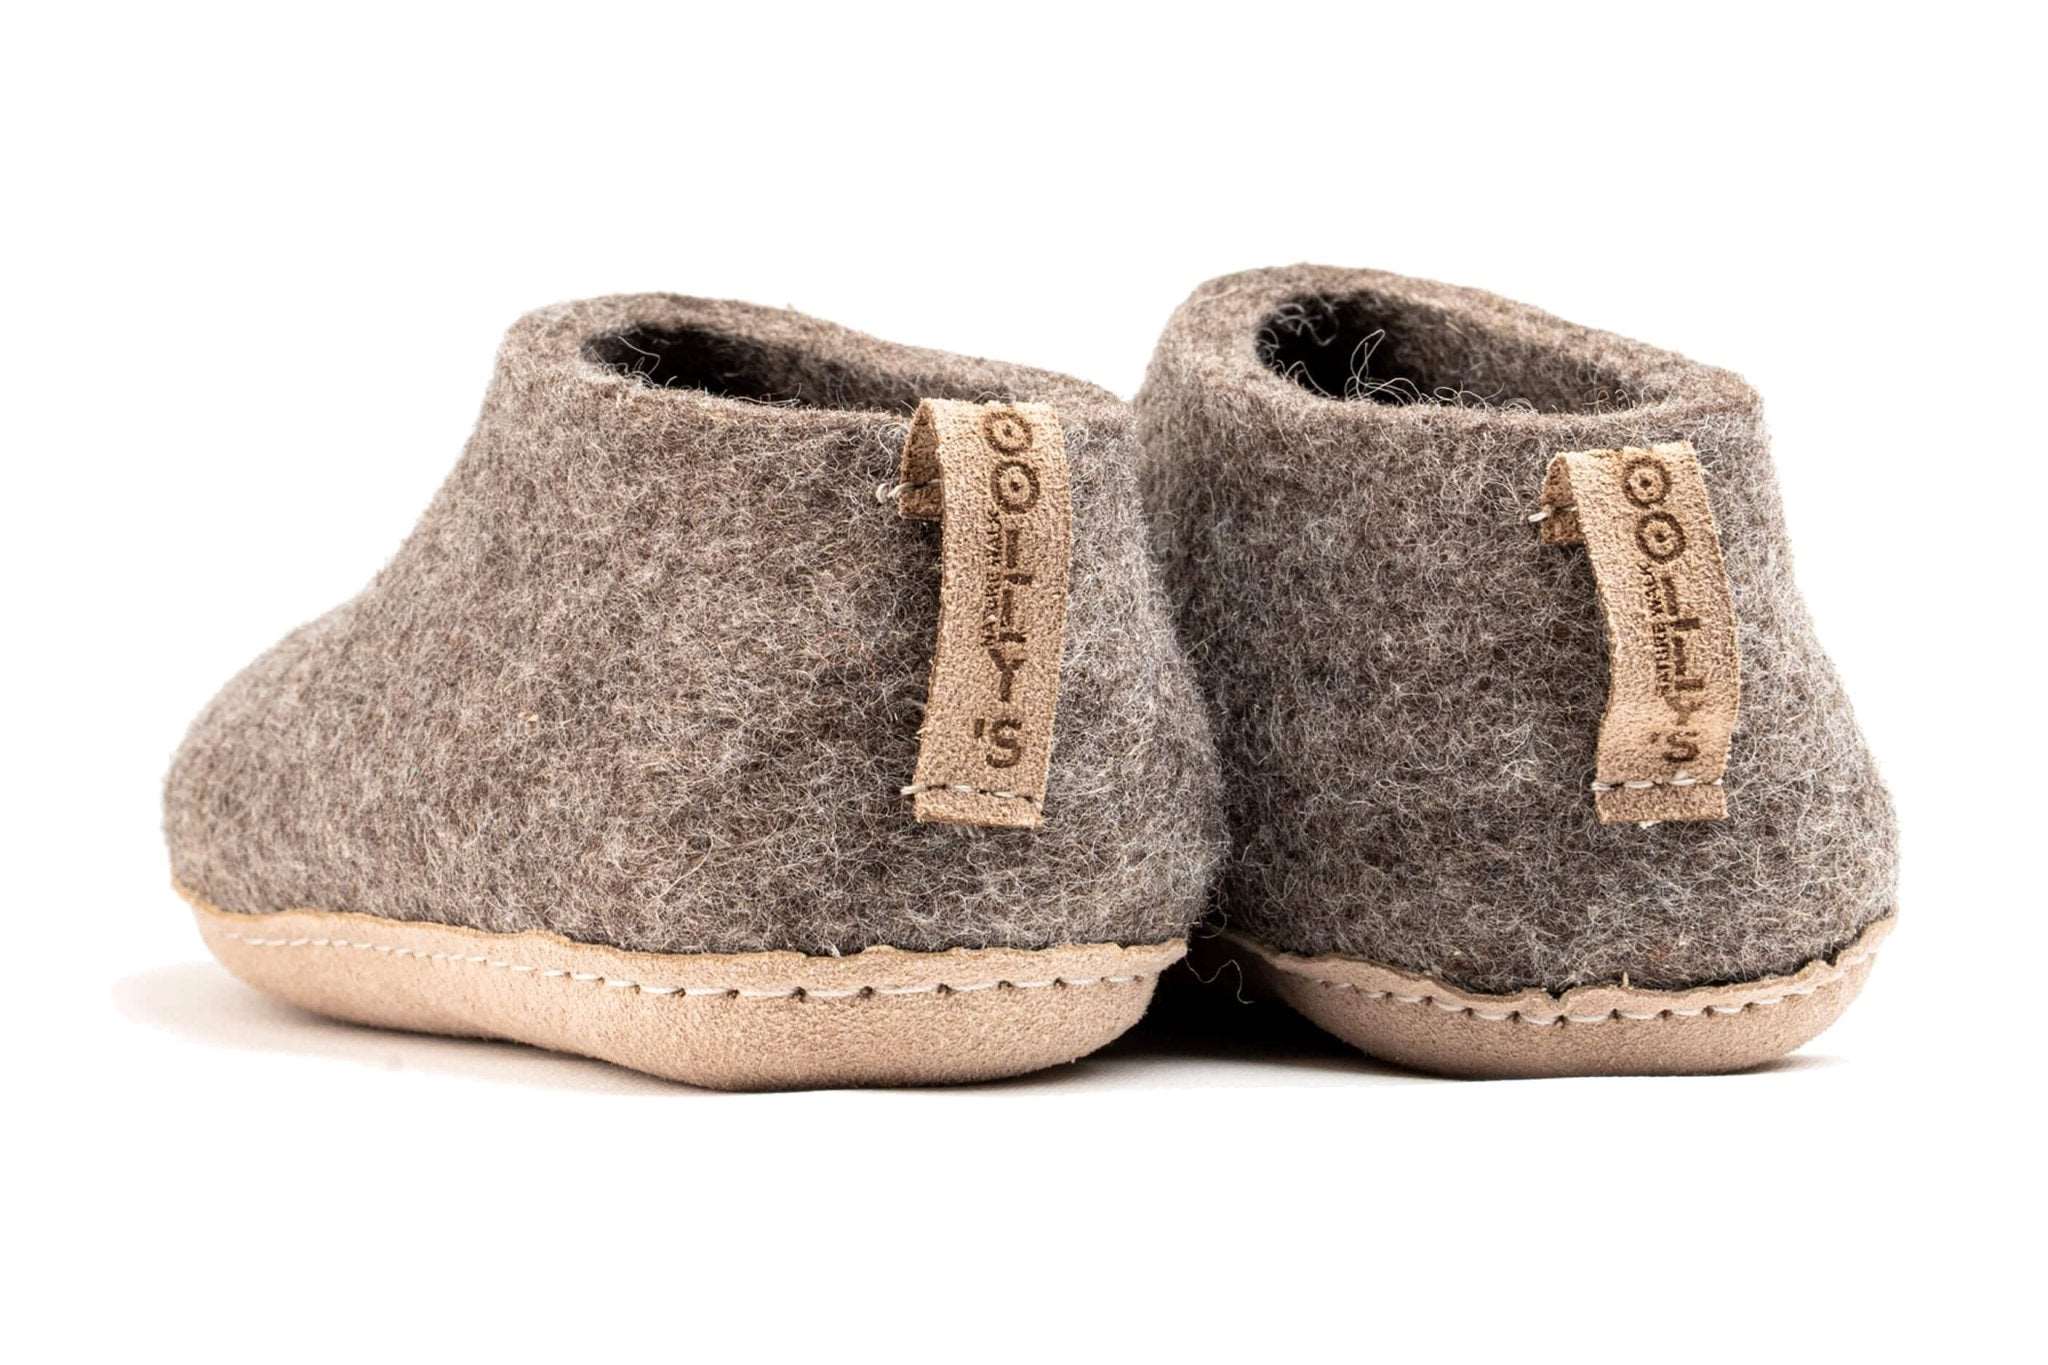 Indoor Shoes With Leather Sole - Natural Brown - Woollyes